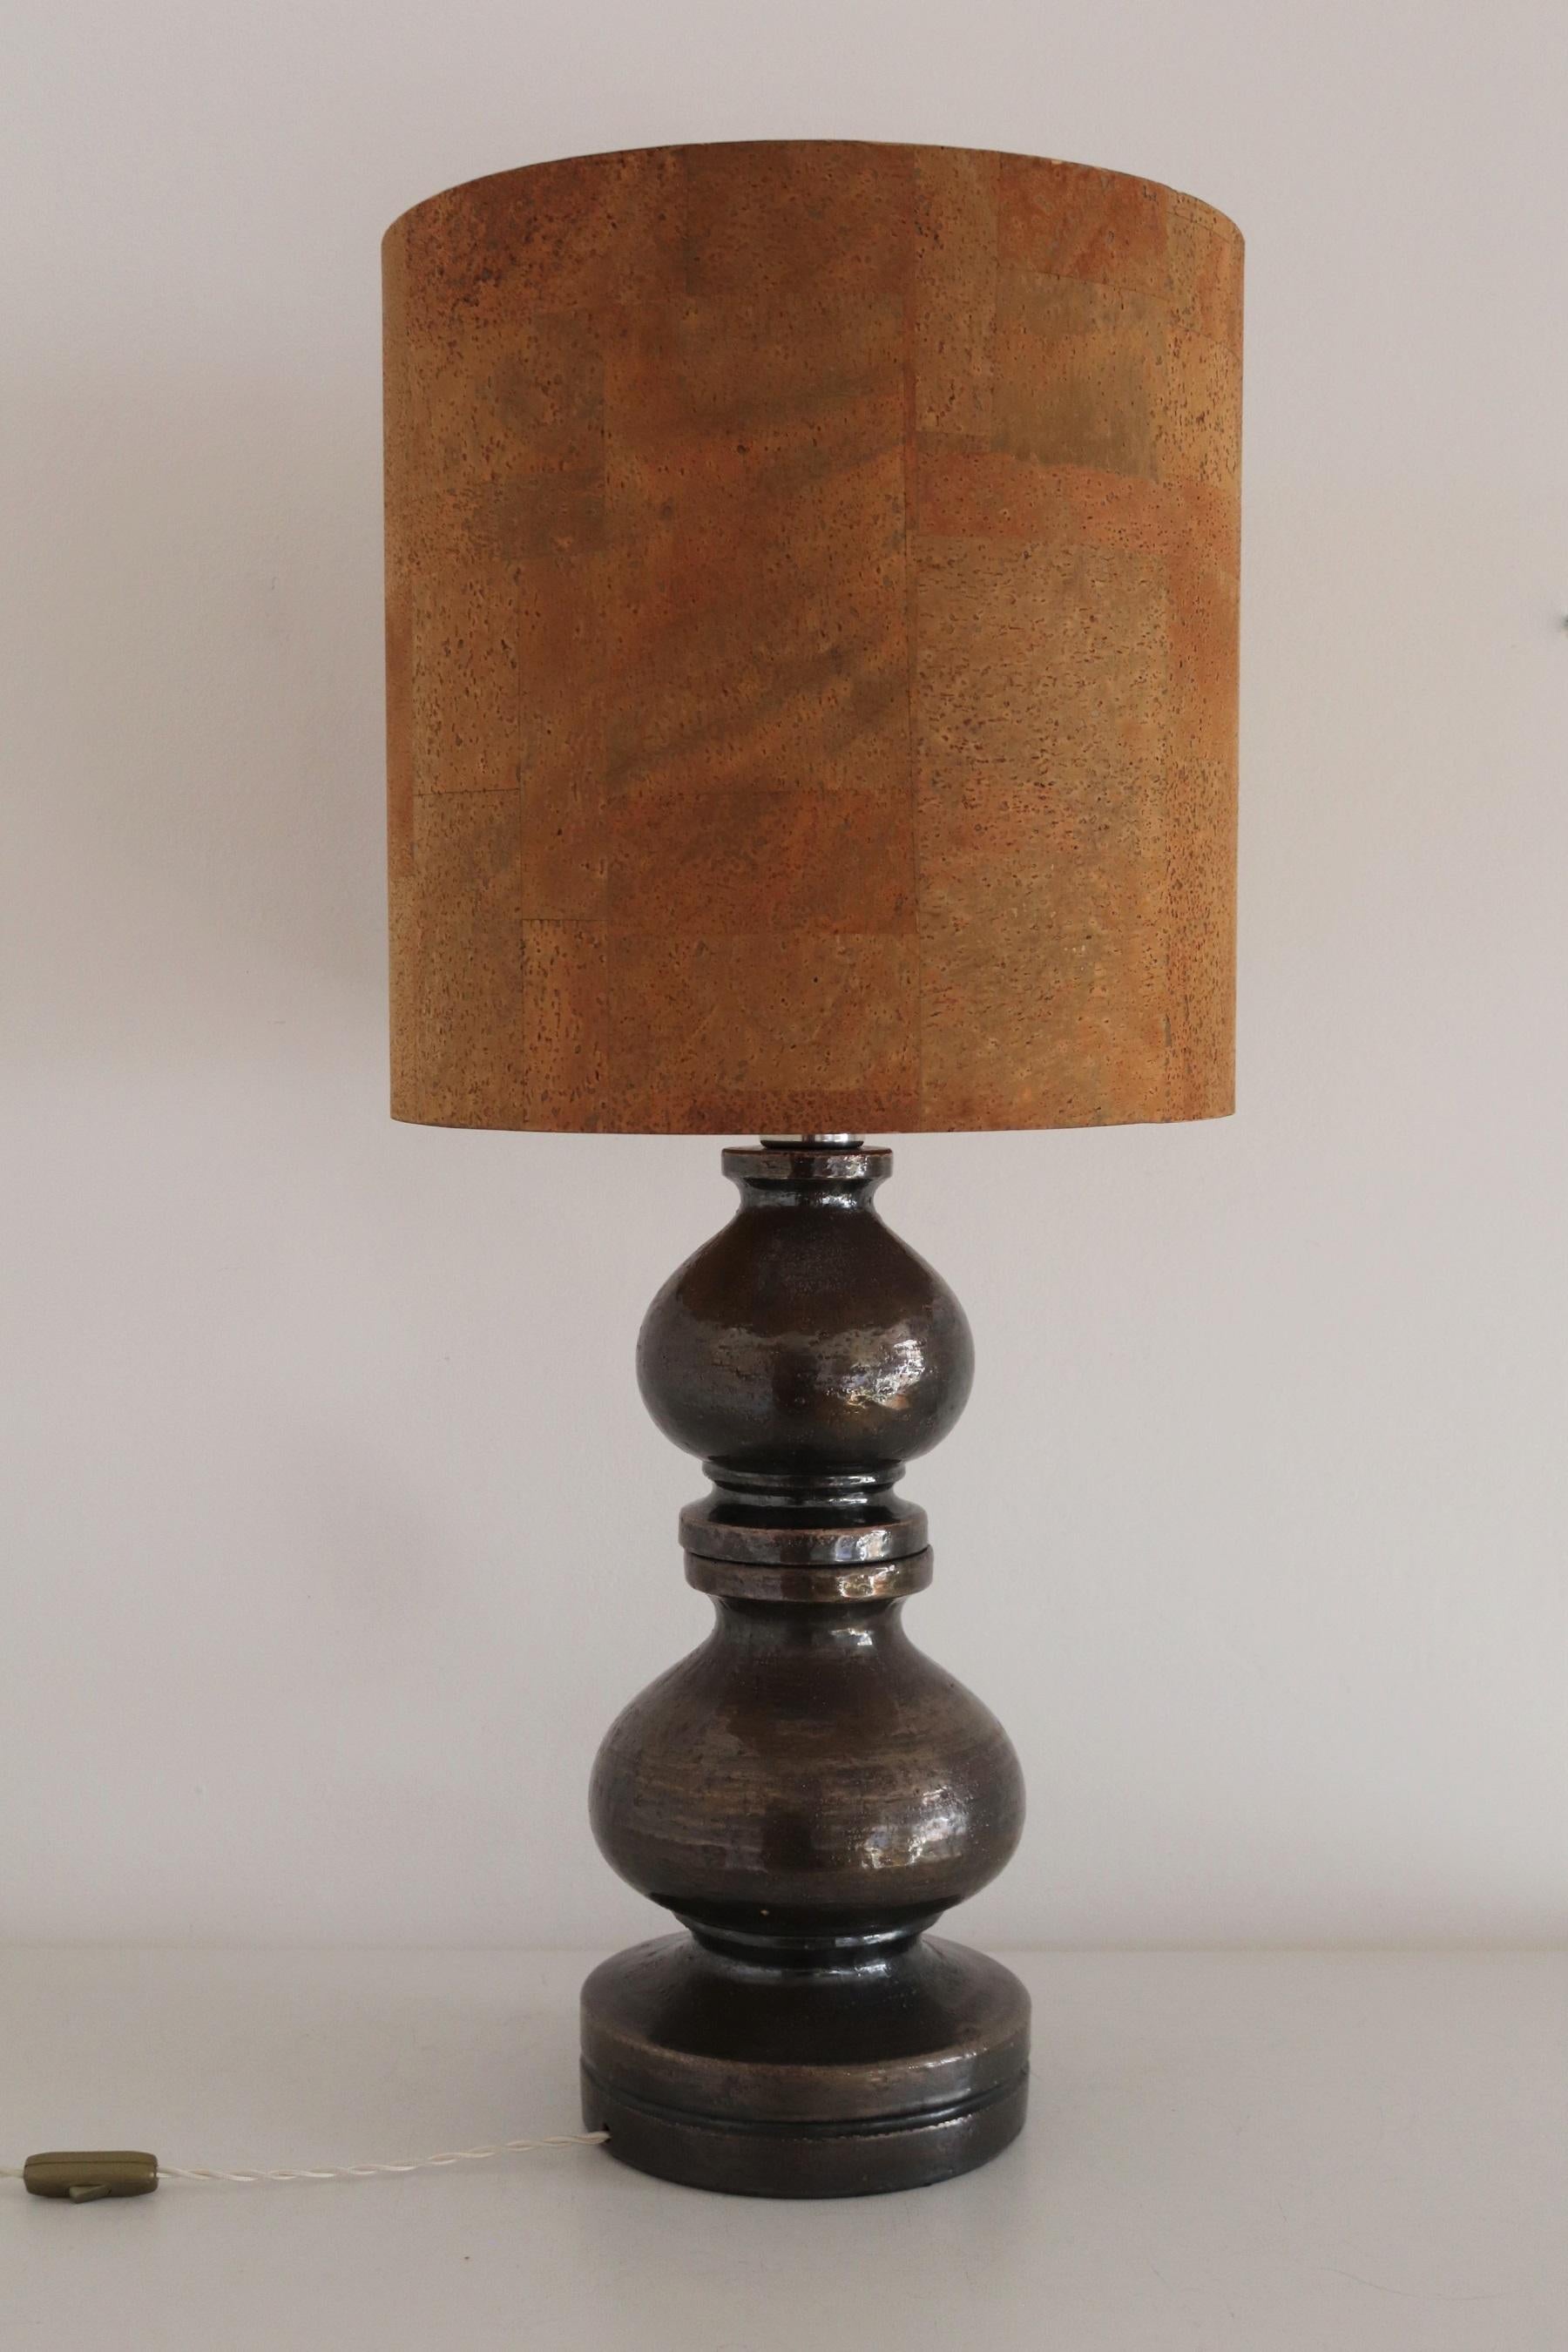 Italian Ceramic Table Lamp by Aldo Londi with Cork Lampshade, 1960 For Sale 5